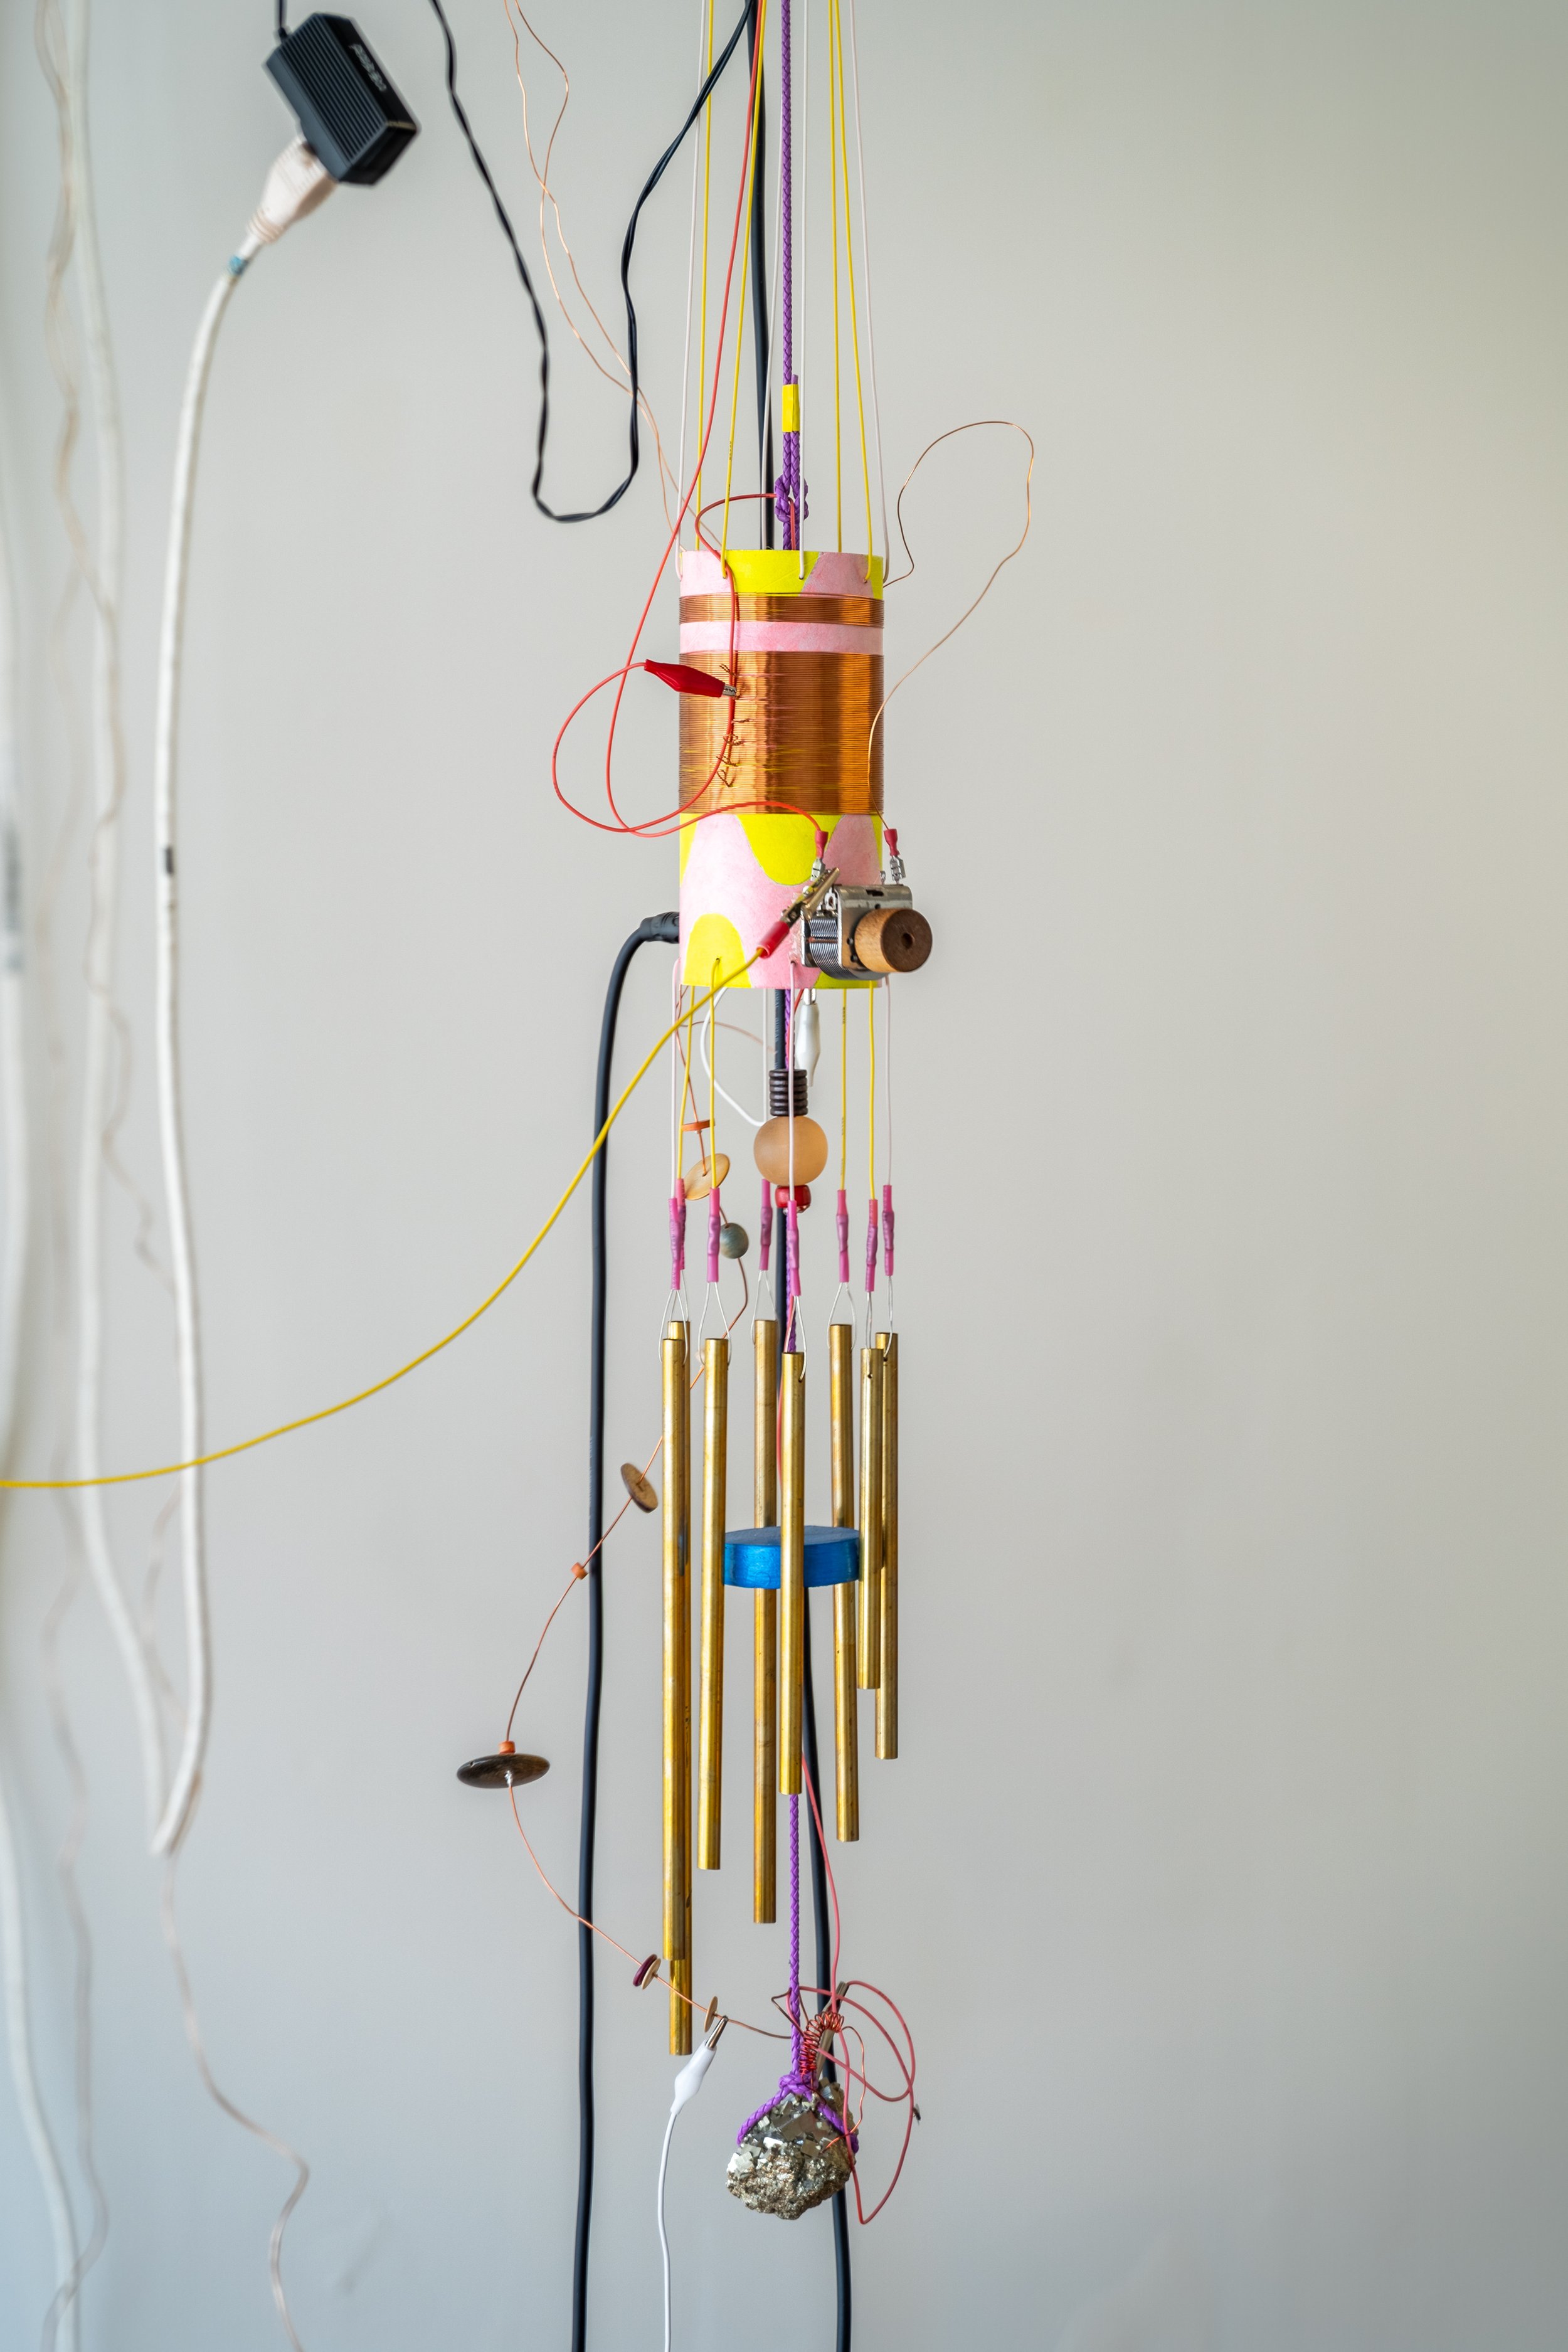  Peter Simensky  Pyrite Radio - Chimes (Yellow/Pink) , 2021  Pyrite (fool's gold), copper, electrical wires, bead work, feathers, cardboard tube, paint, amplifiers, and radio hardware 